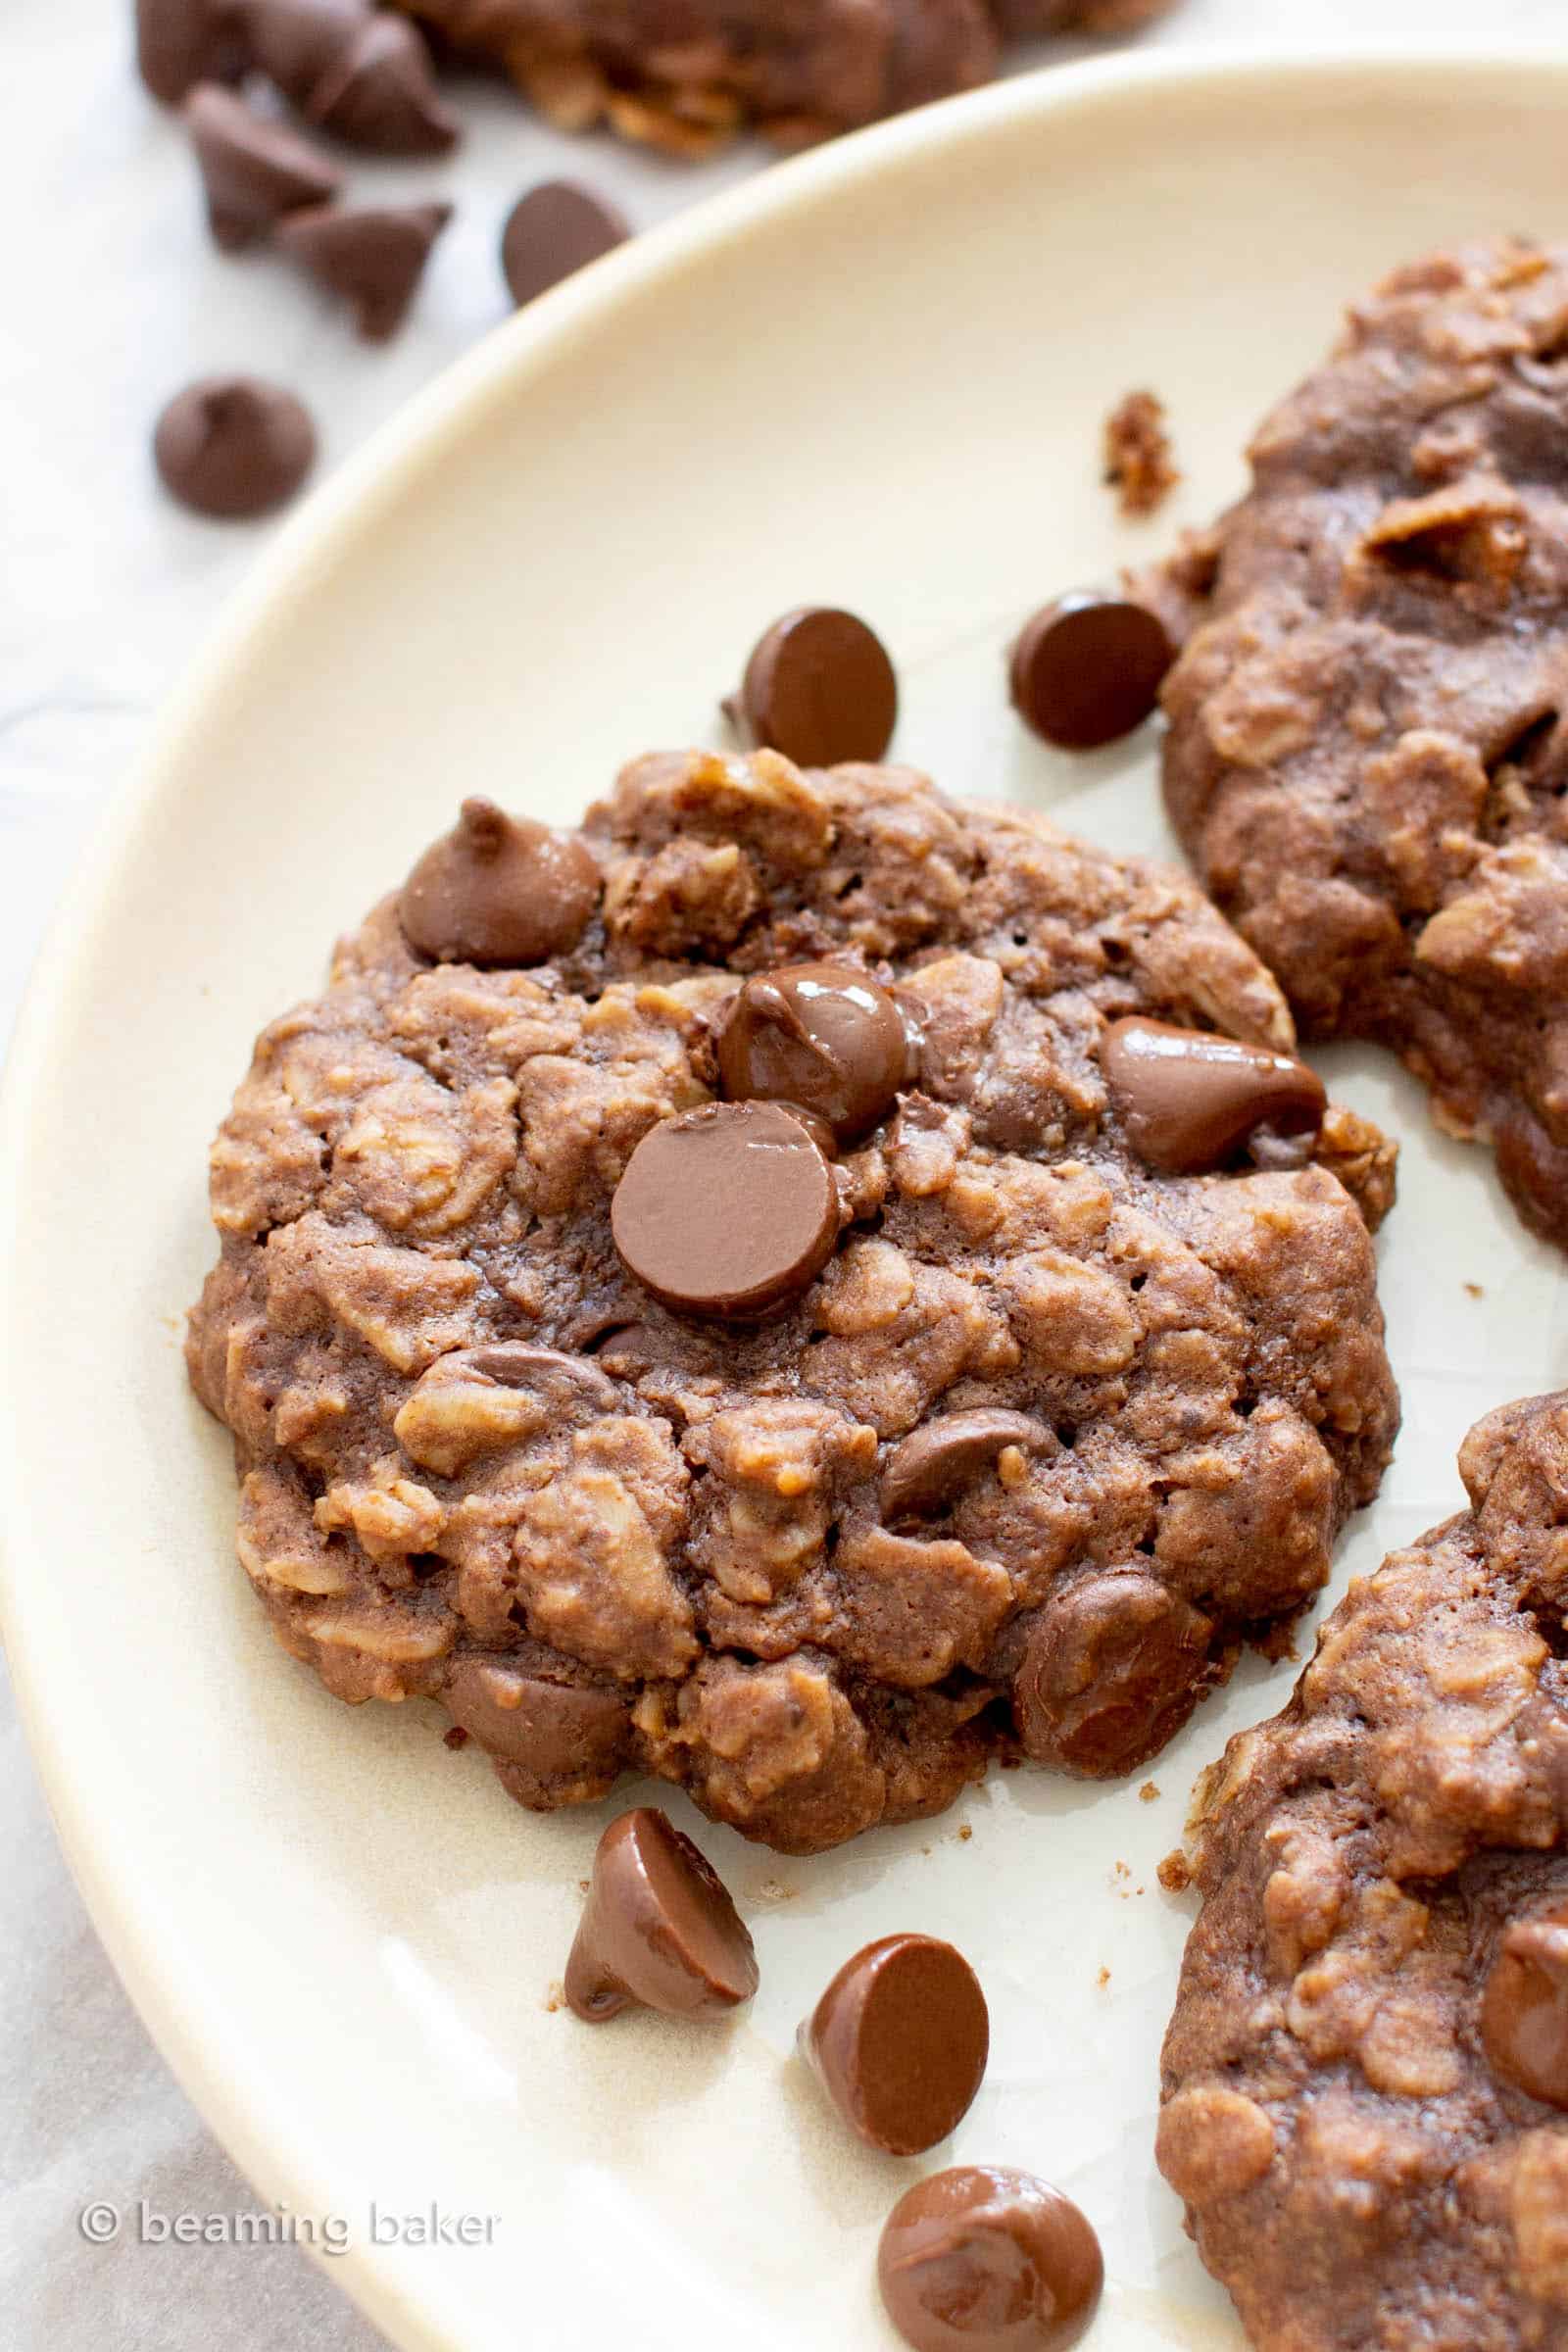 Healthy Chocolate Oatmeal Cookies: the best healthy chocolate oatmeal cookies—chewy & delicious, packed with chocolate chips & made with healthy ingredients. #Healthy #Oatmeal #Cookies #Chocolate | Recipe at BeamingBaker.com